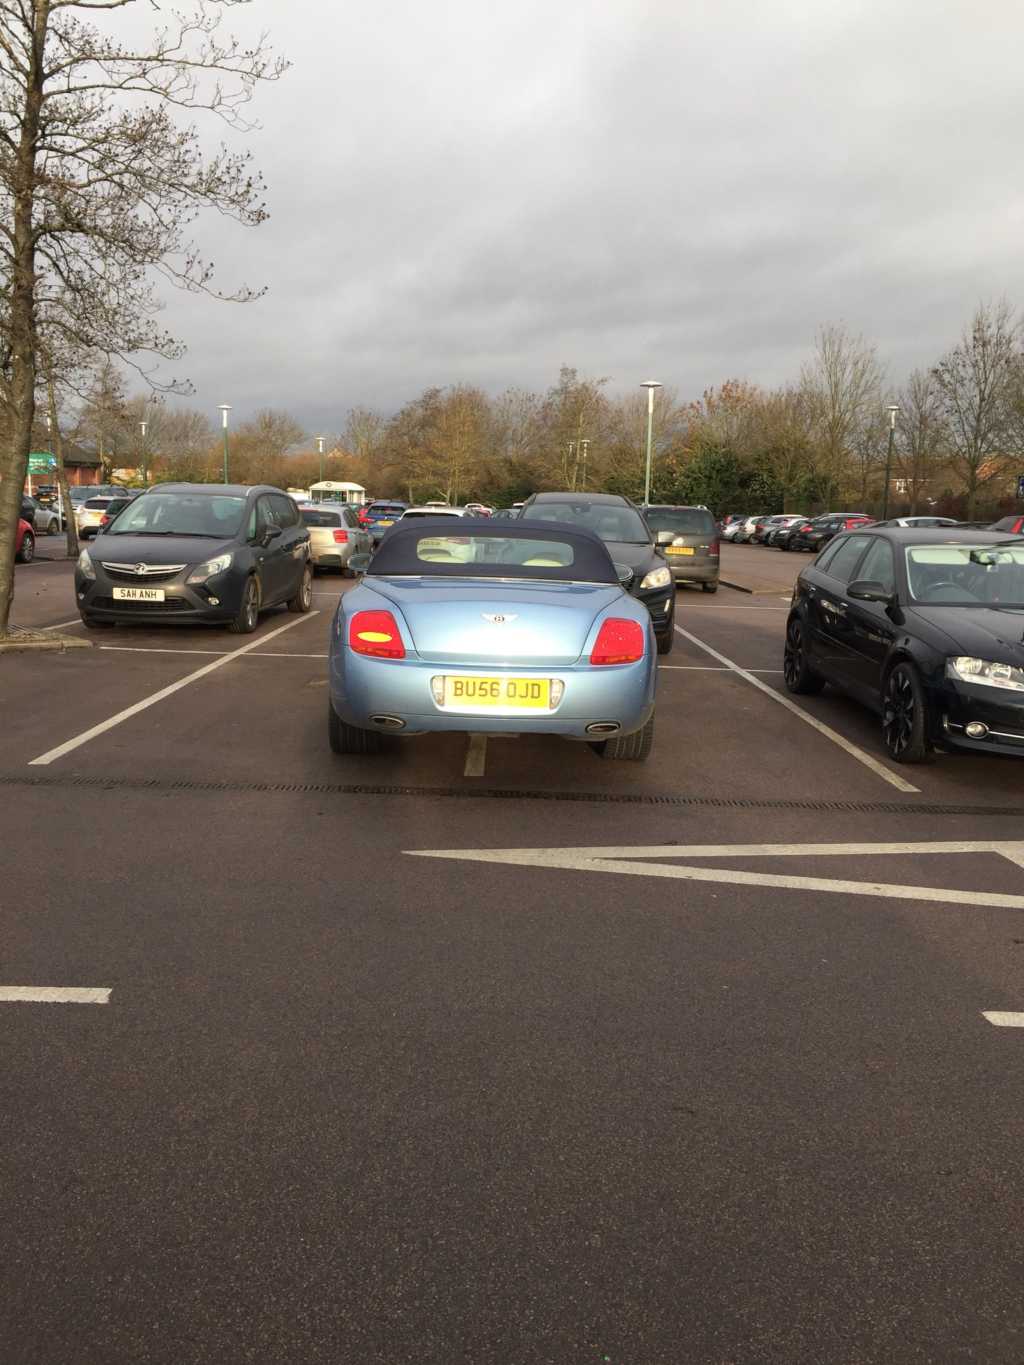 BU56 OJD is an Inconsiderate Parker